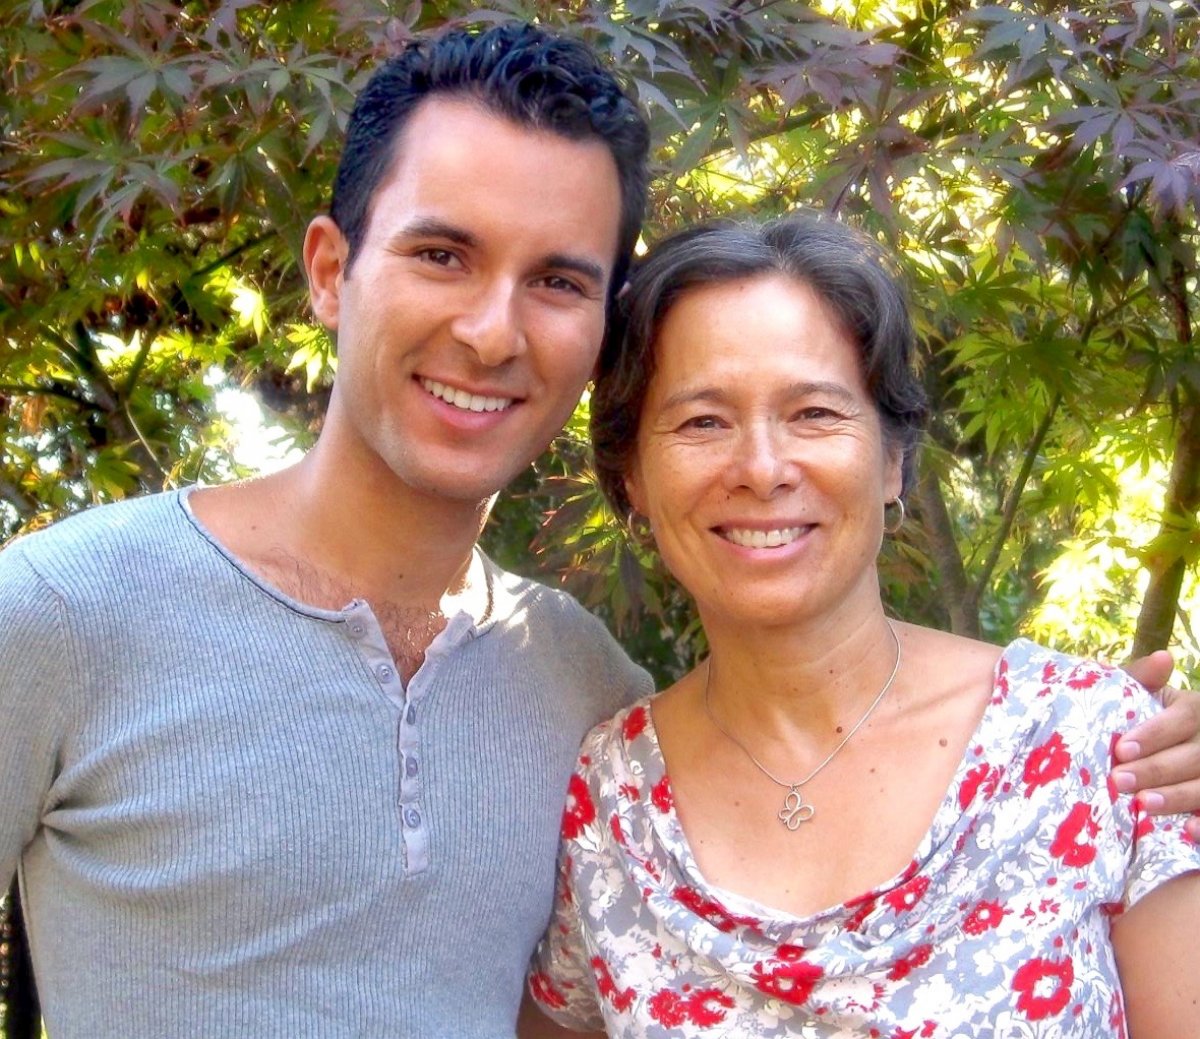 PHOTO: Laurin Mayeno poses with her son, Danny Moreno, in an undated family photo.